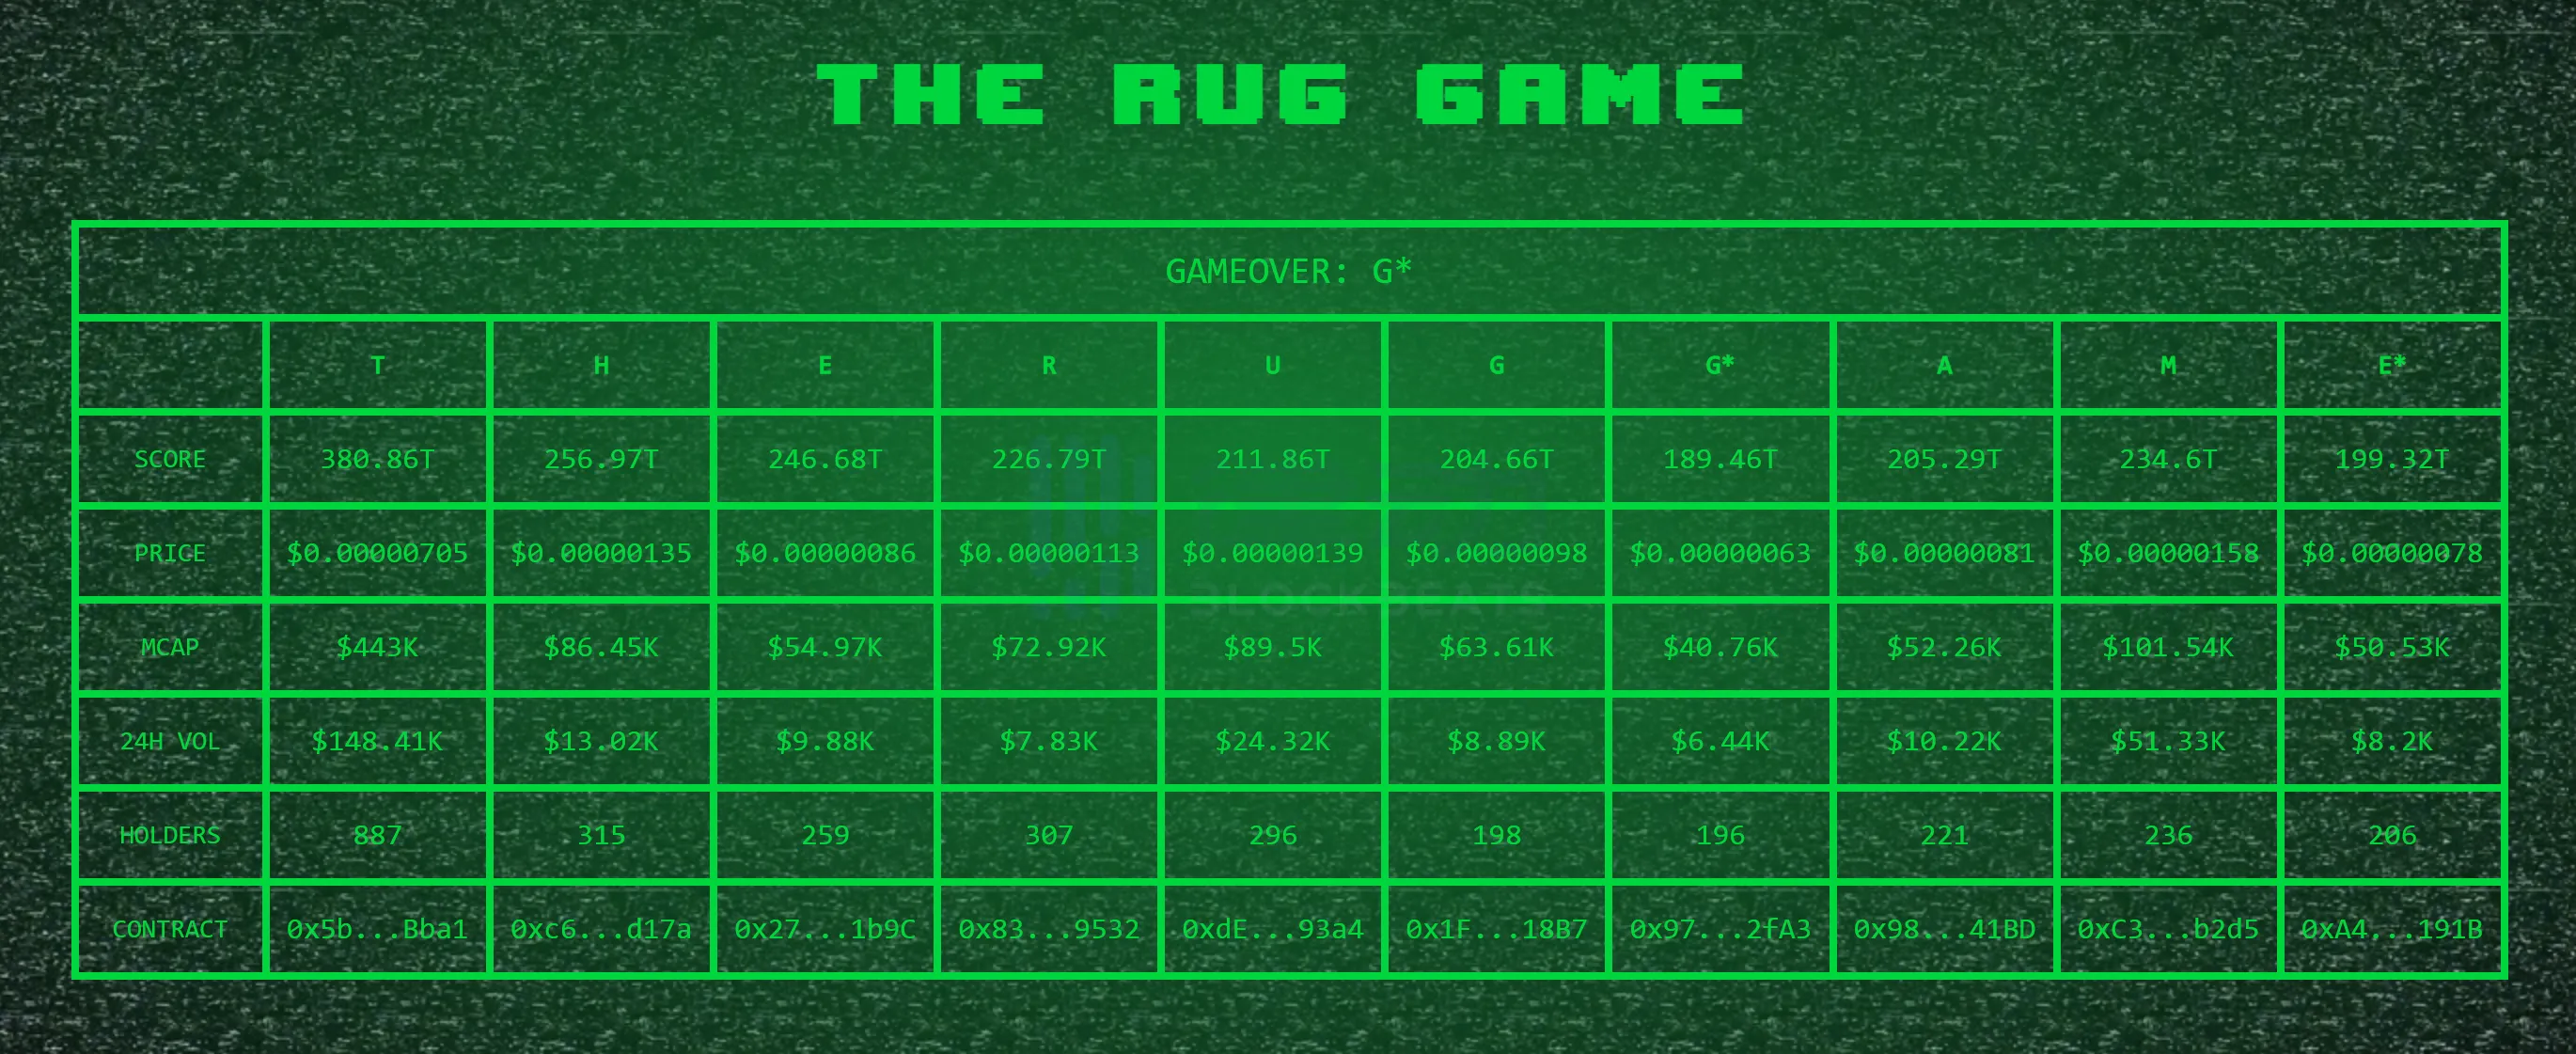 The Rug Game：末位淘汰，赢者通吃的「生存游戏」